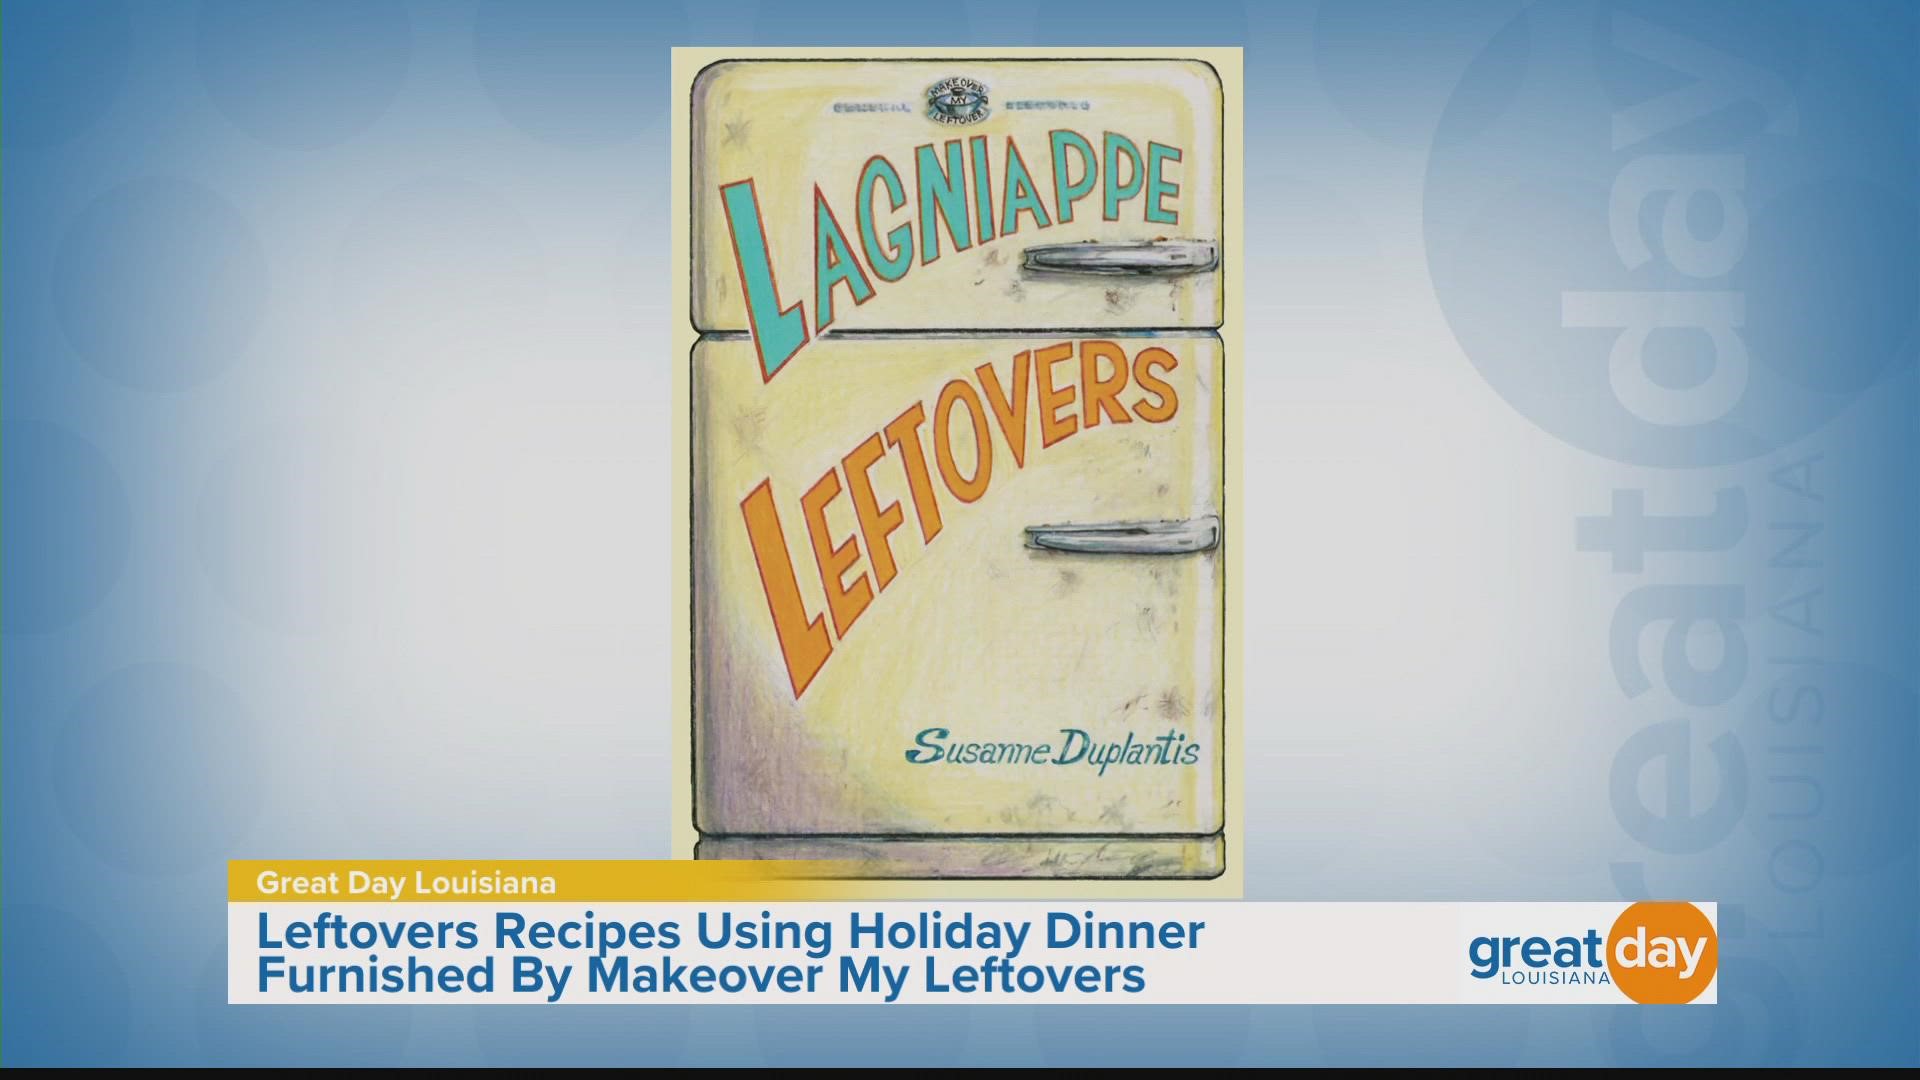 The author of "Lagniappe Leftovers" shared a recipe for leftover rolls.